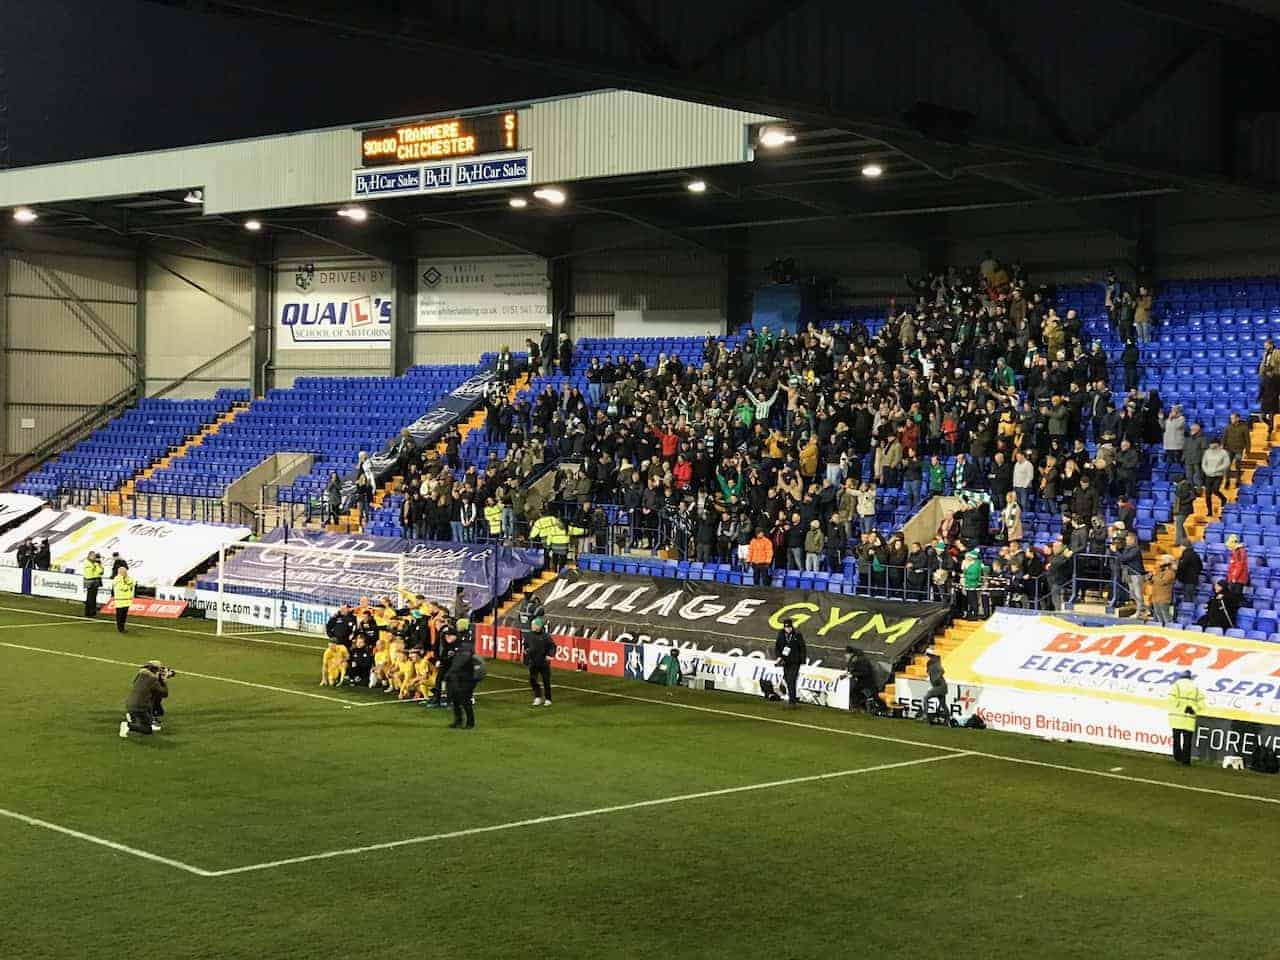 Chichester City at Tranmere Rovers in the FA Cup: What It’s All About